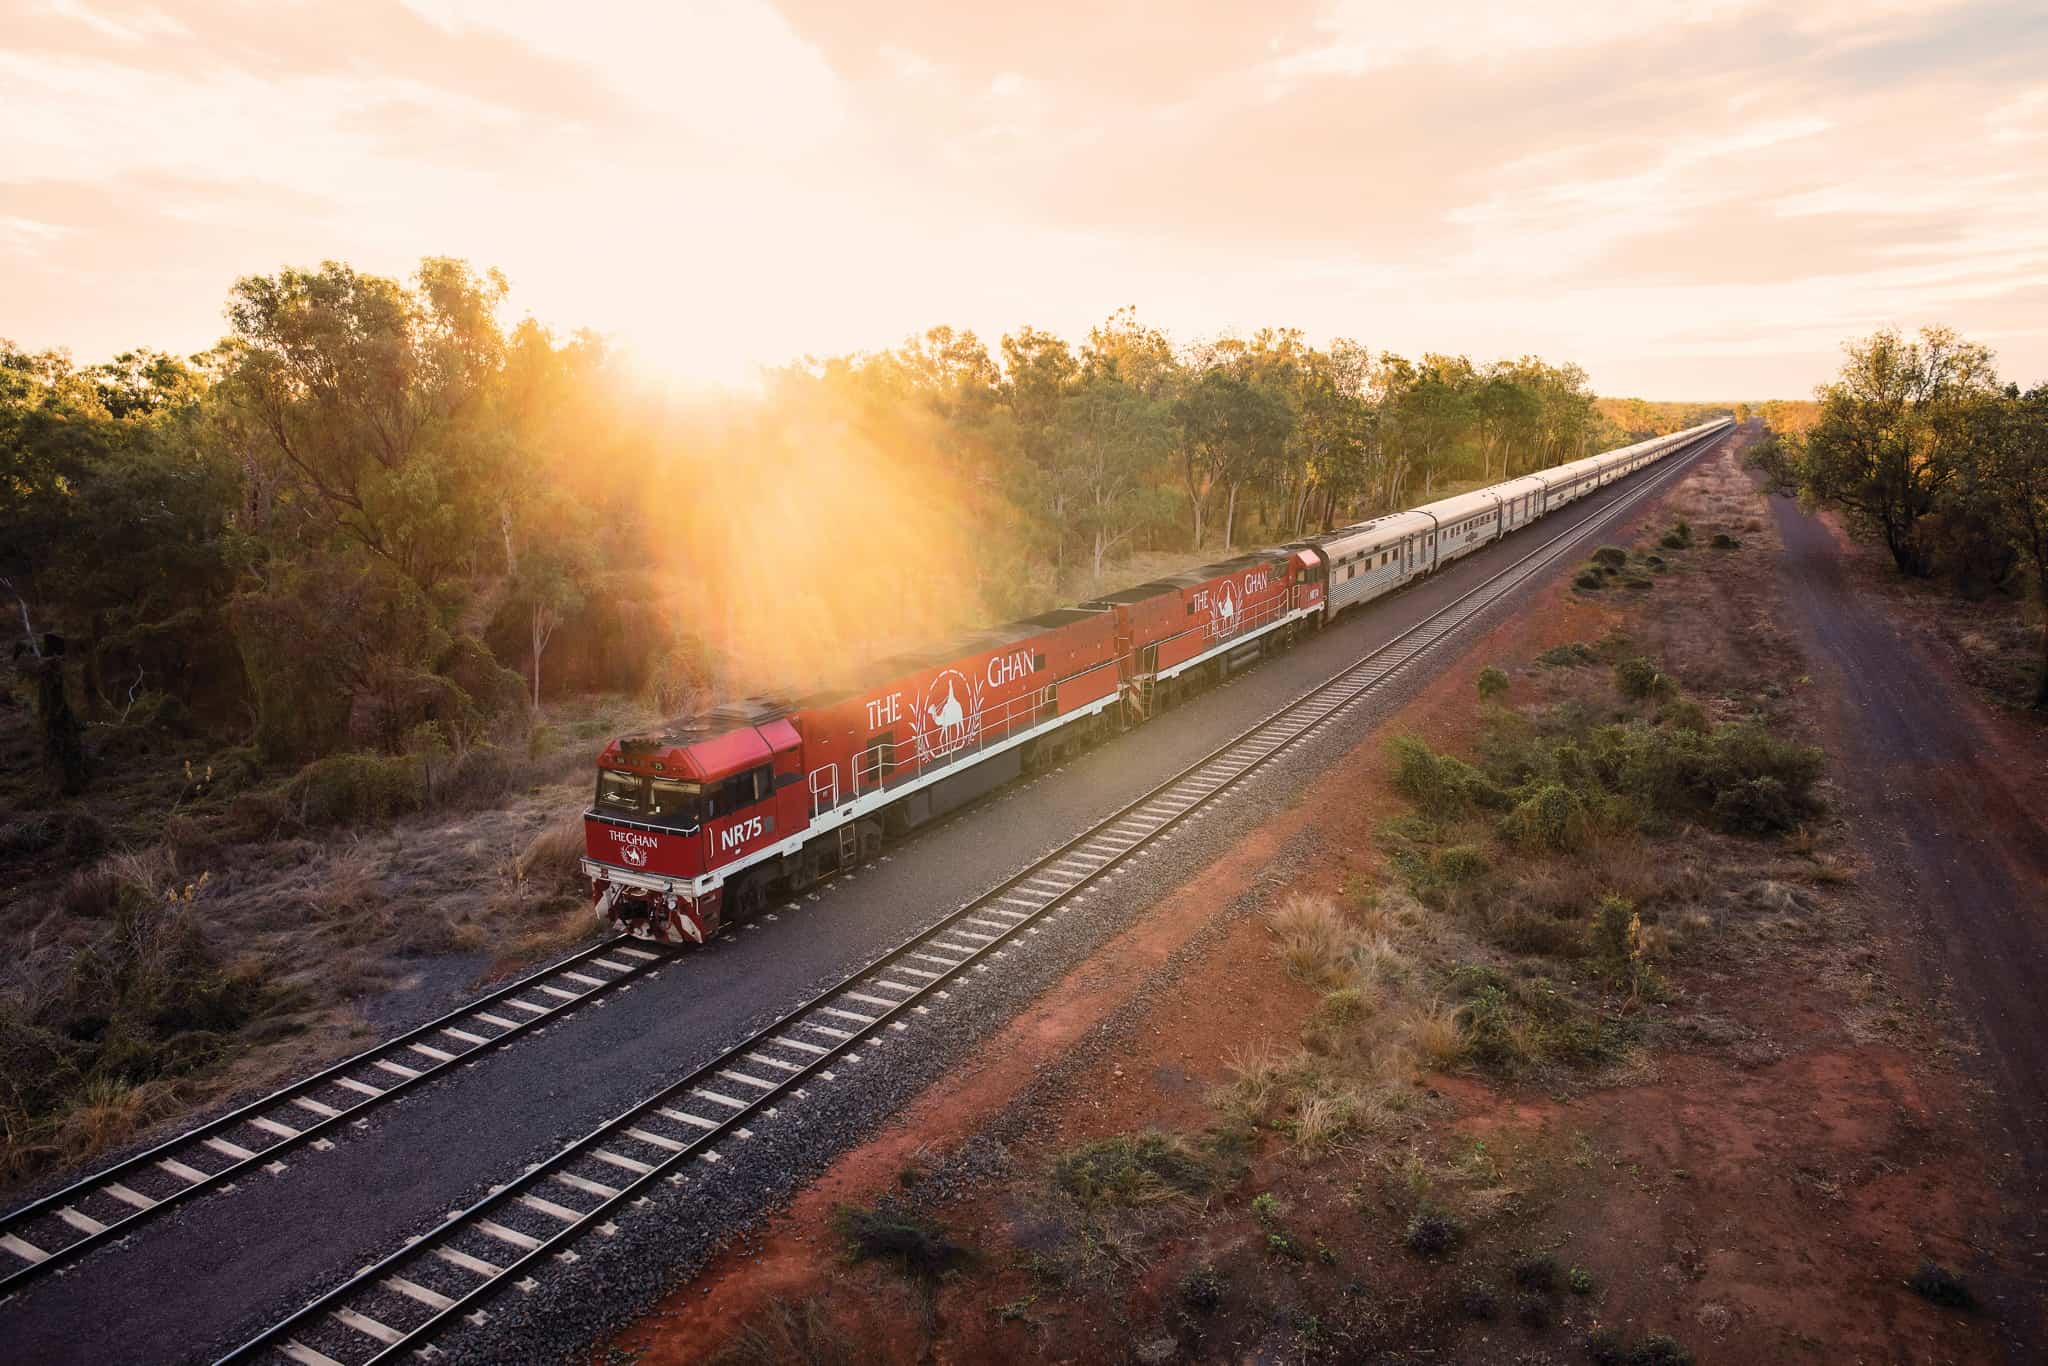 The Ghan train travelling through the Northern Territory Australia